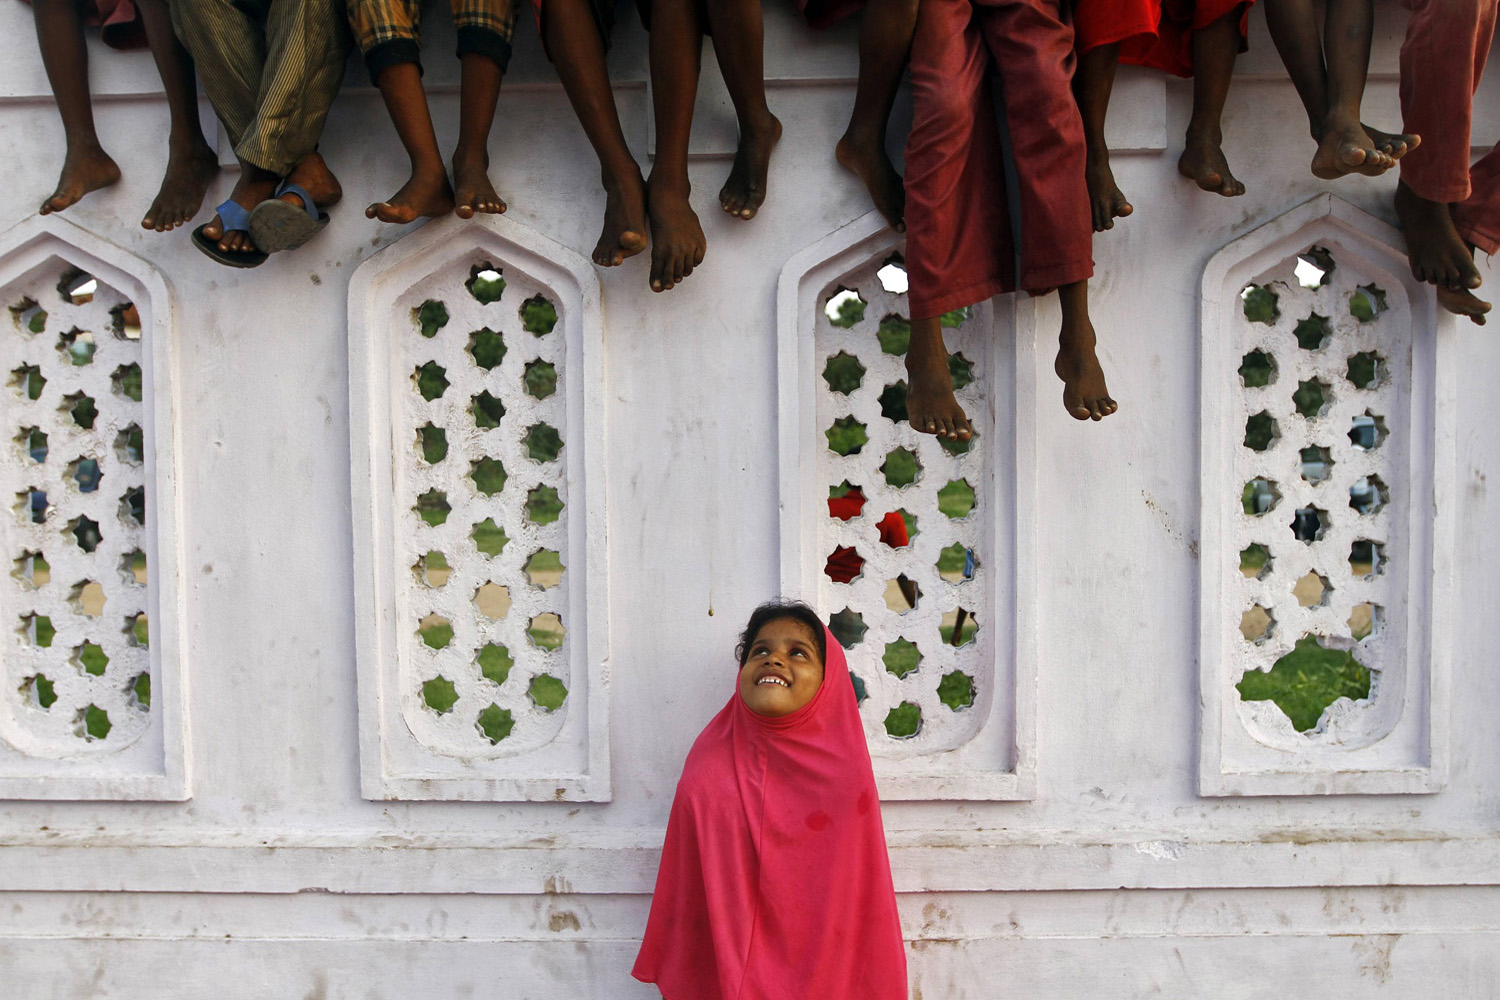 A Muslim girl looks up while some boys sit on a wall, inside the premises of a mosque, as they wait for Iftar (breaking fast) meal during the holy month of Ramadan in Chennai, India on July 16, 2014.